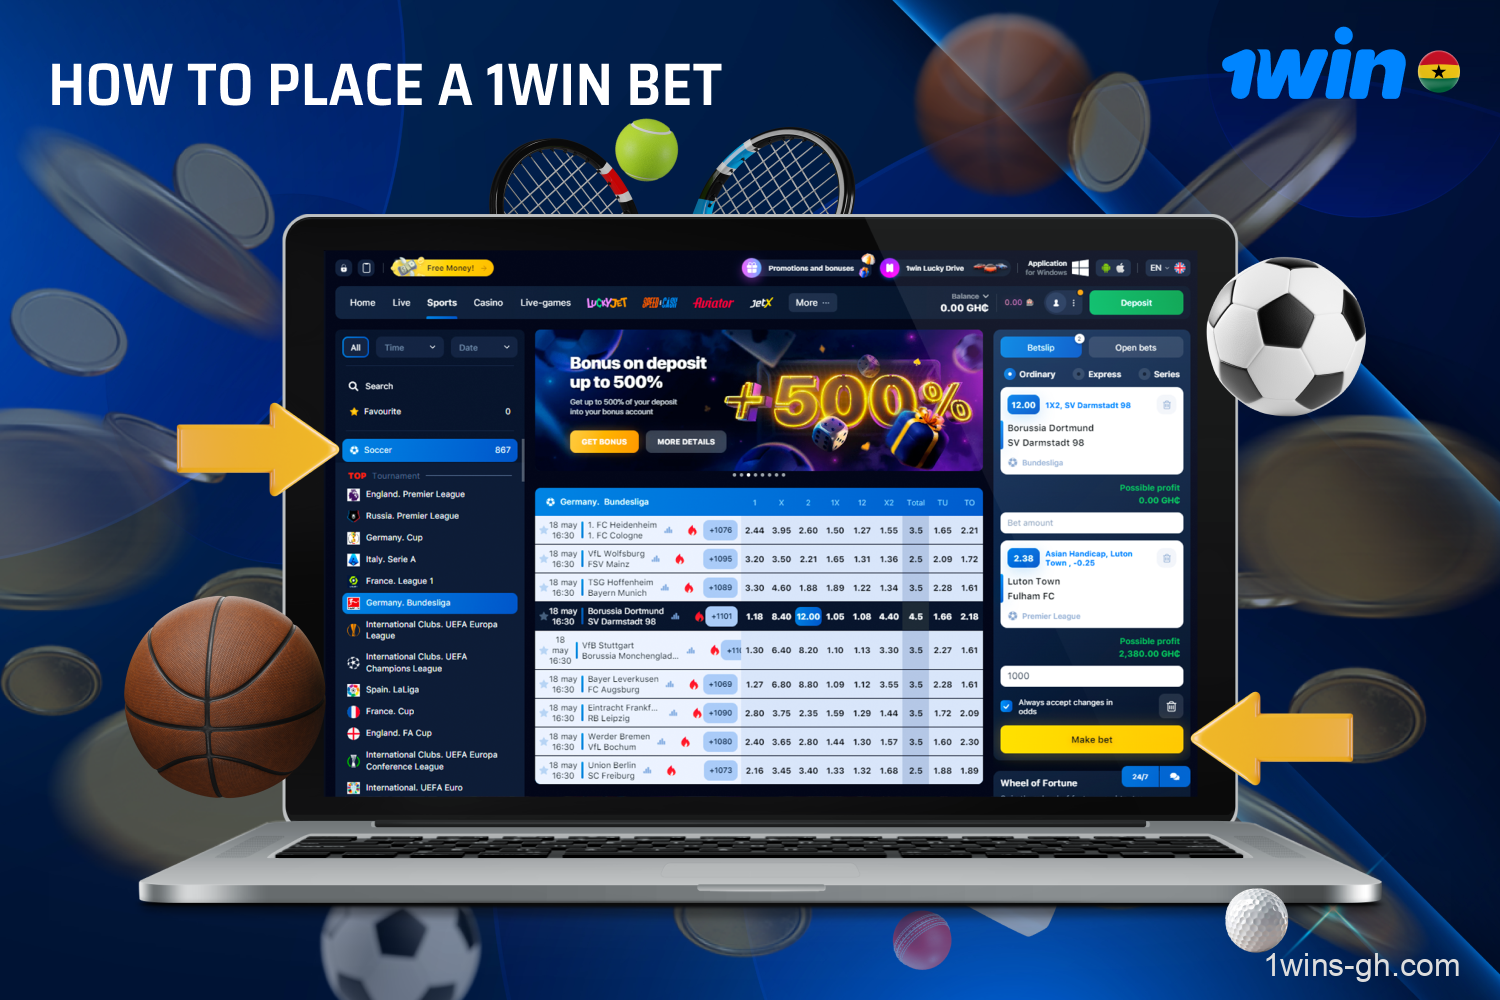 Before betting on 1win, every user in Ghana must register and fund their account